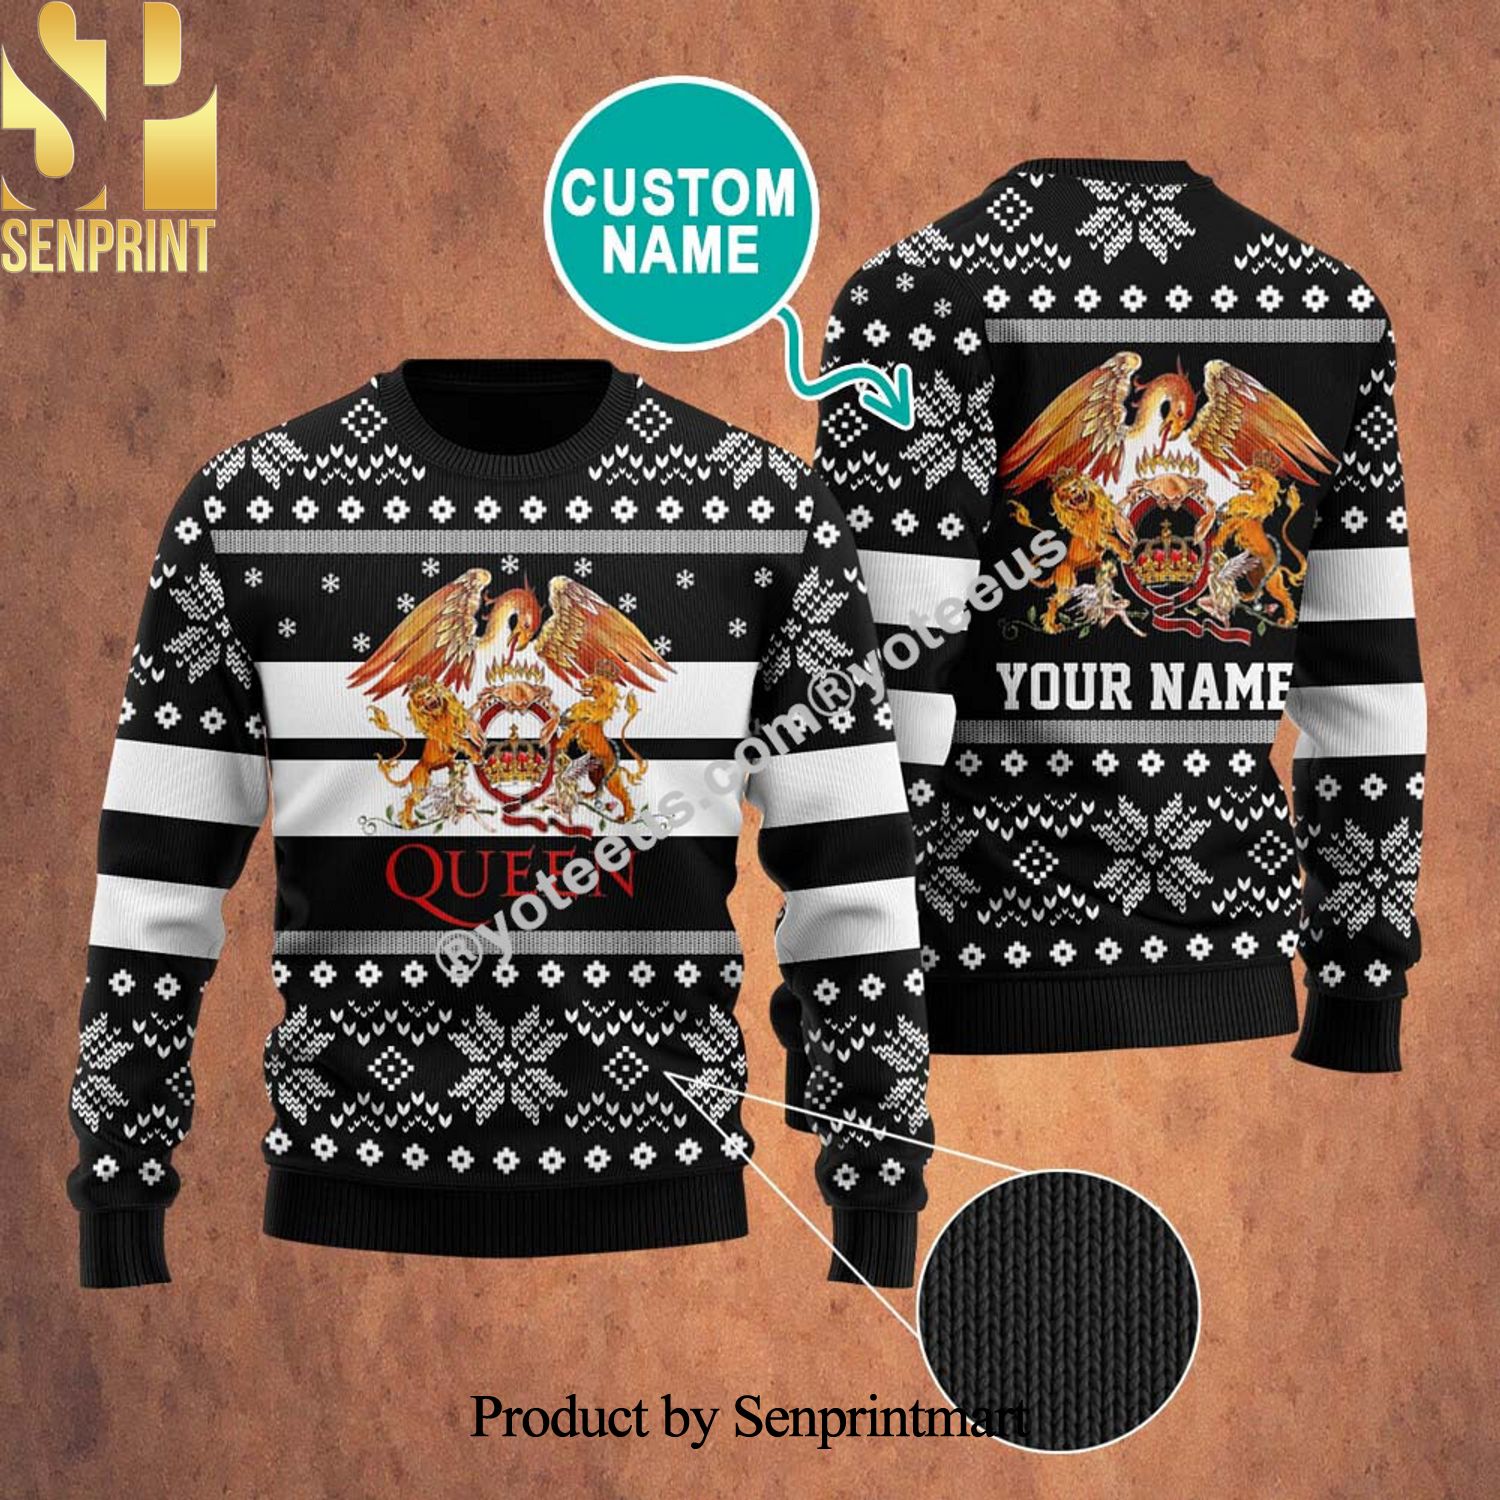 Queen Rock Band Ugly Christmas Wool Knitted Sweater